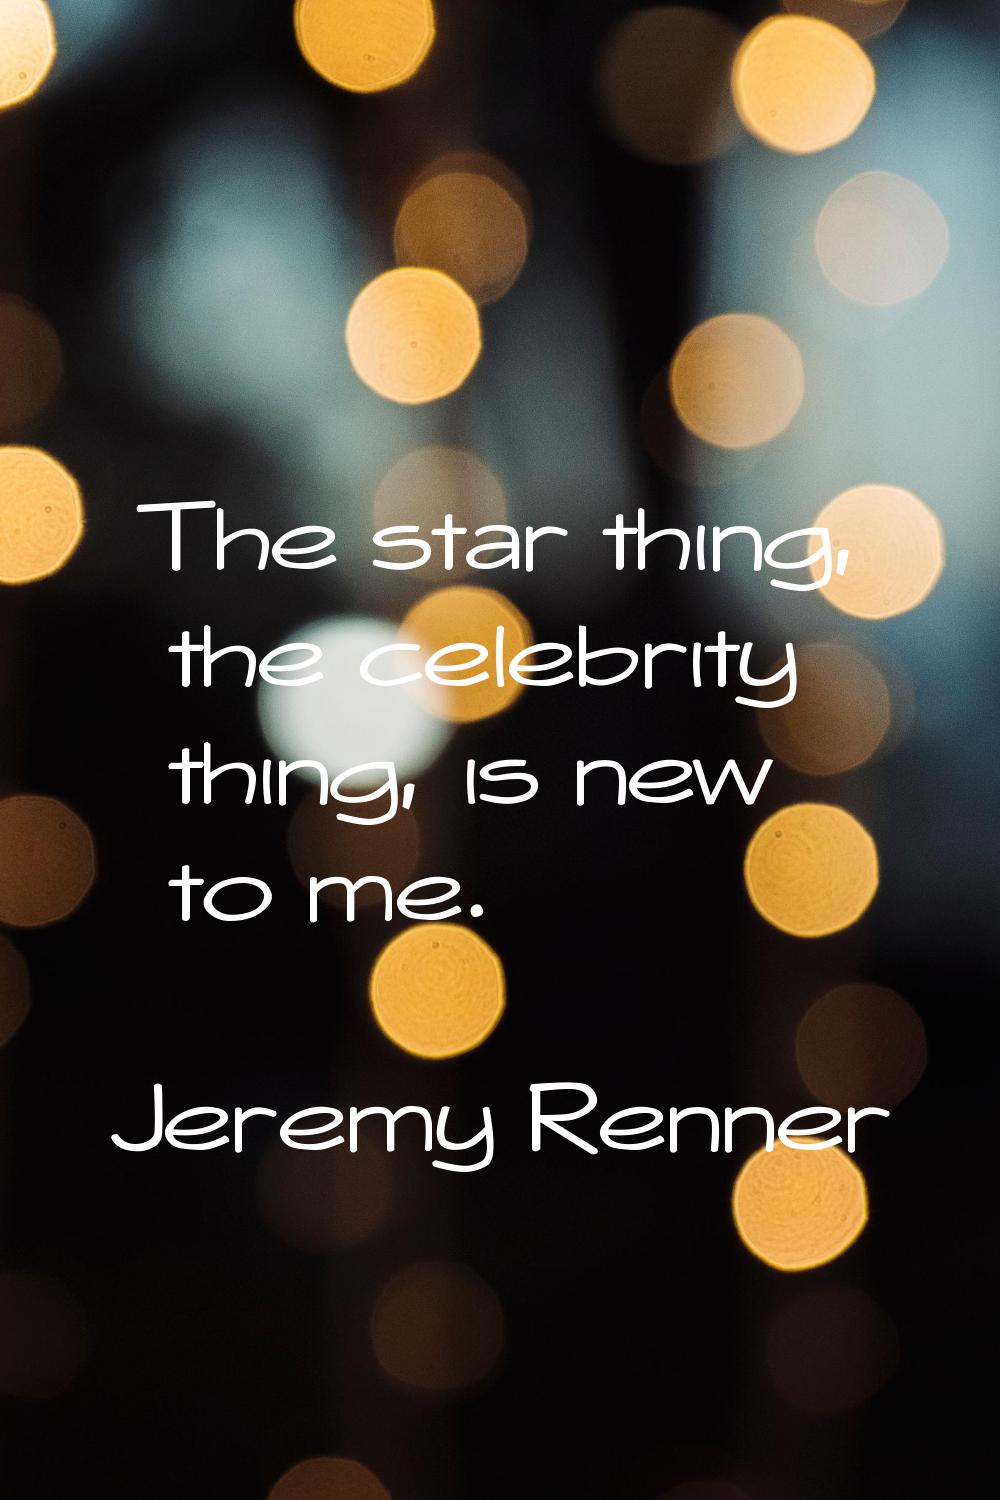 The star thing, the celebrity thing, is new to me.